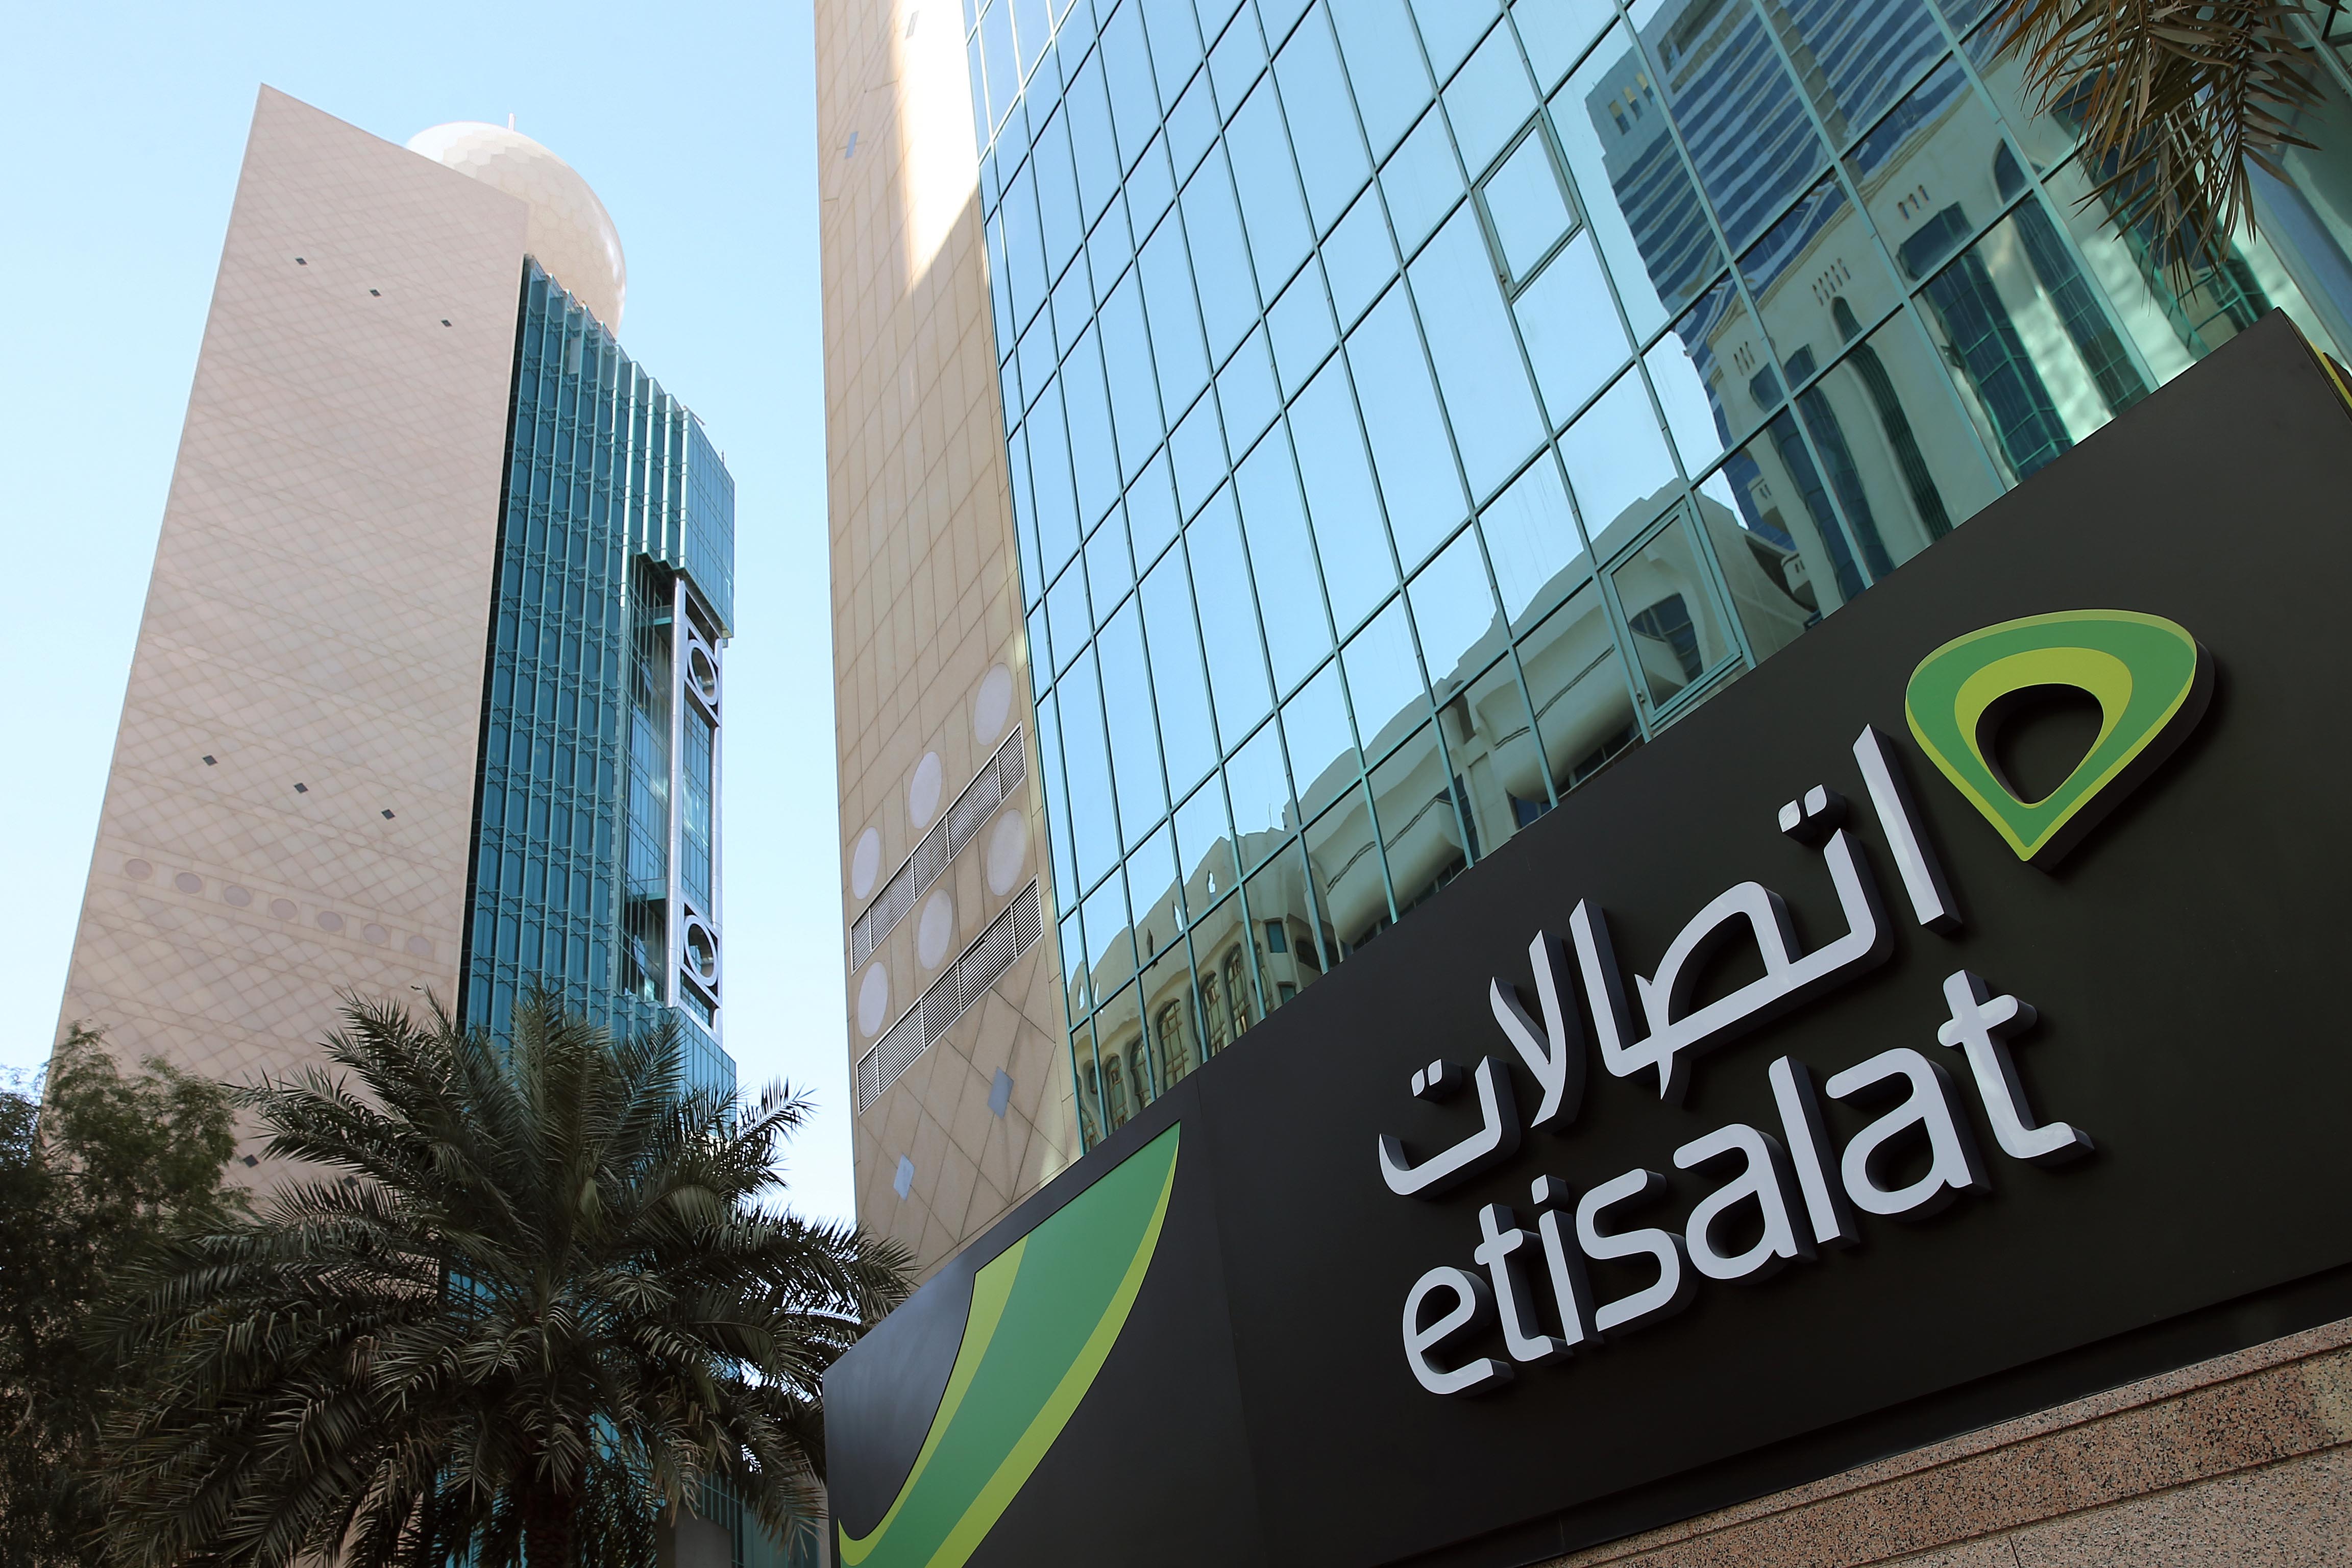 Etisalat Launches First Commercial 5G Network In The MENA